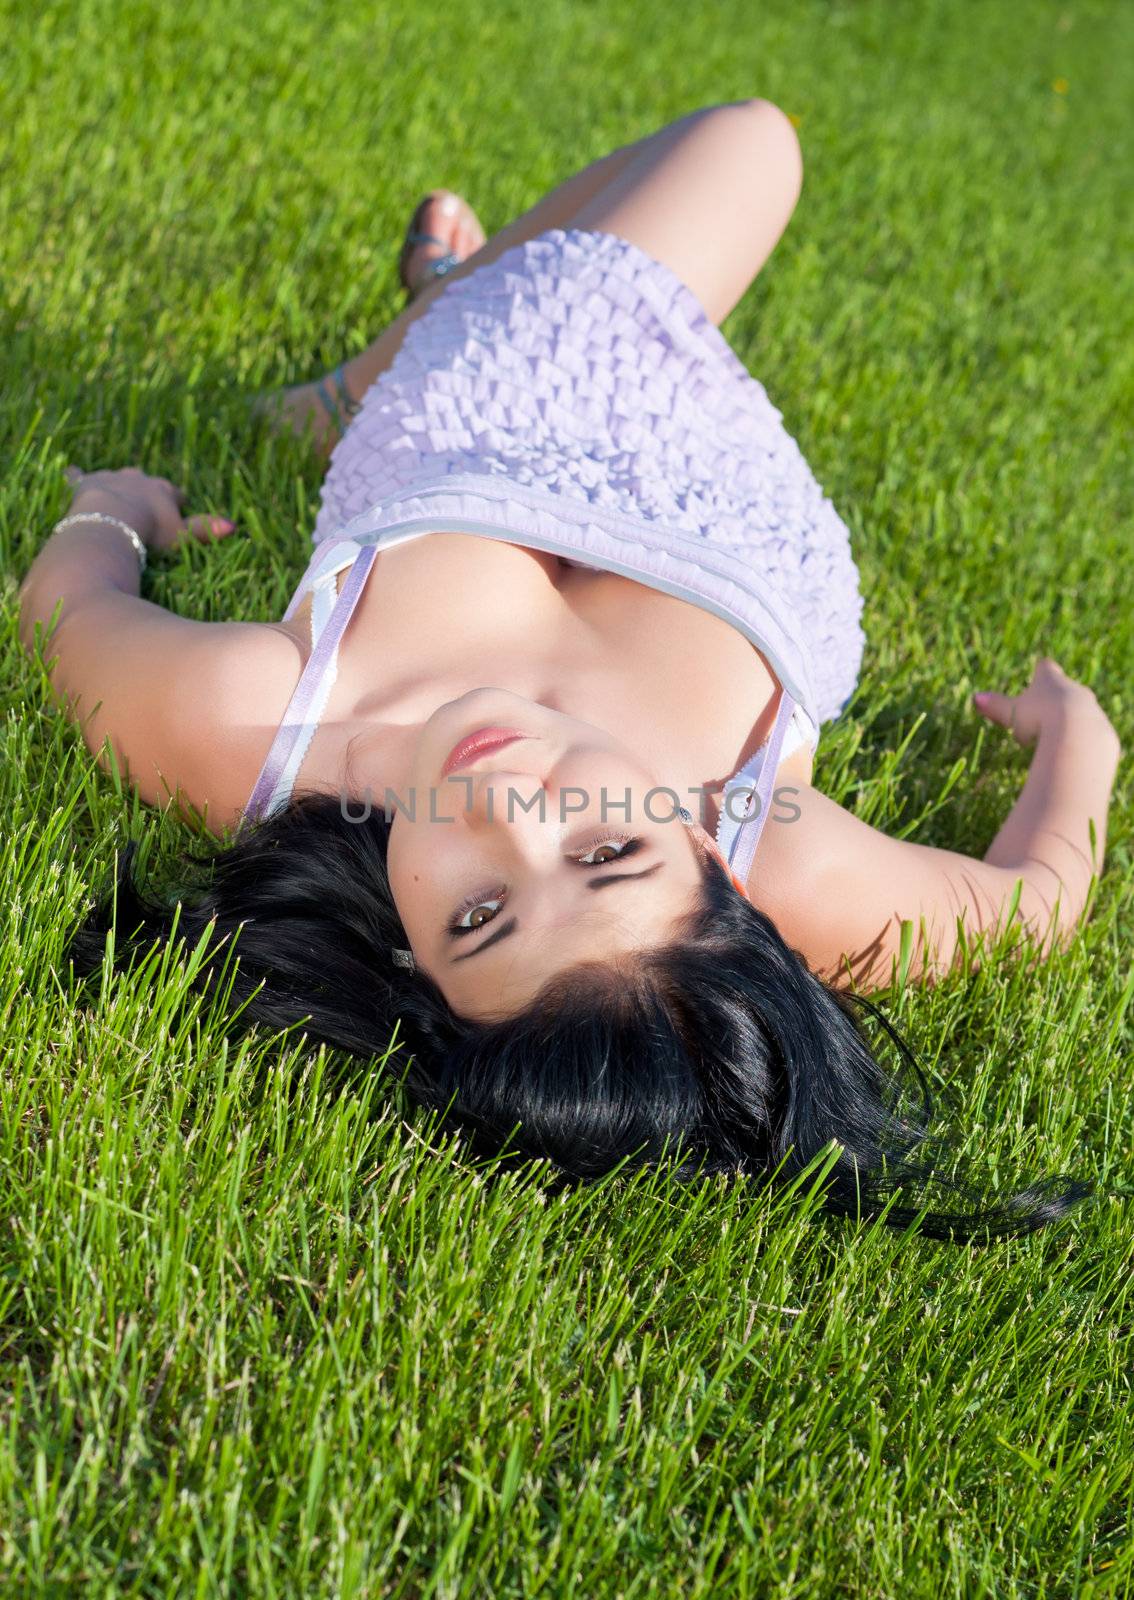 Woman lying on his back in grass.